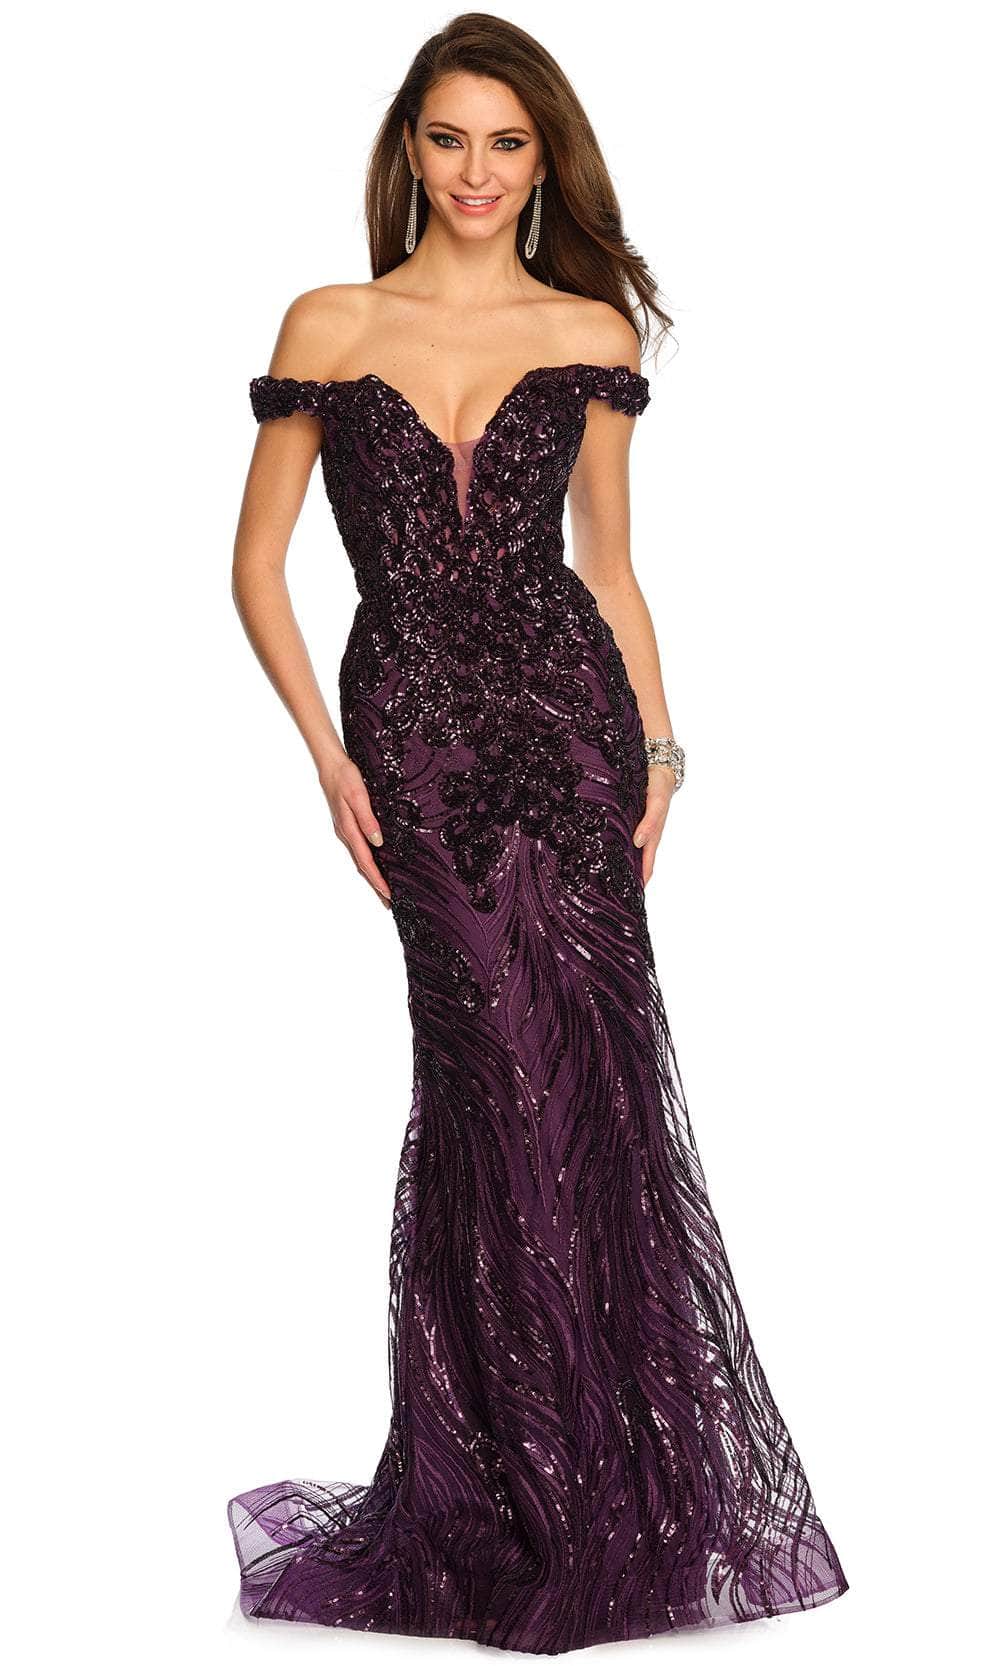 Image of Dave & Johnny 11002 - Off-Shoulder Sequin Prom Gown